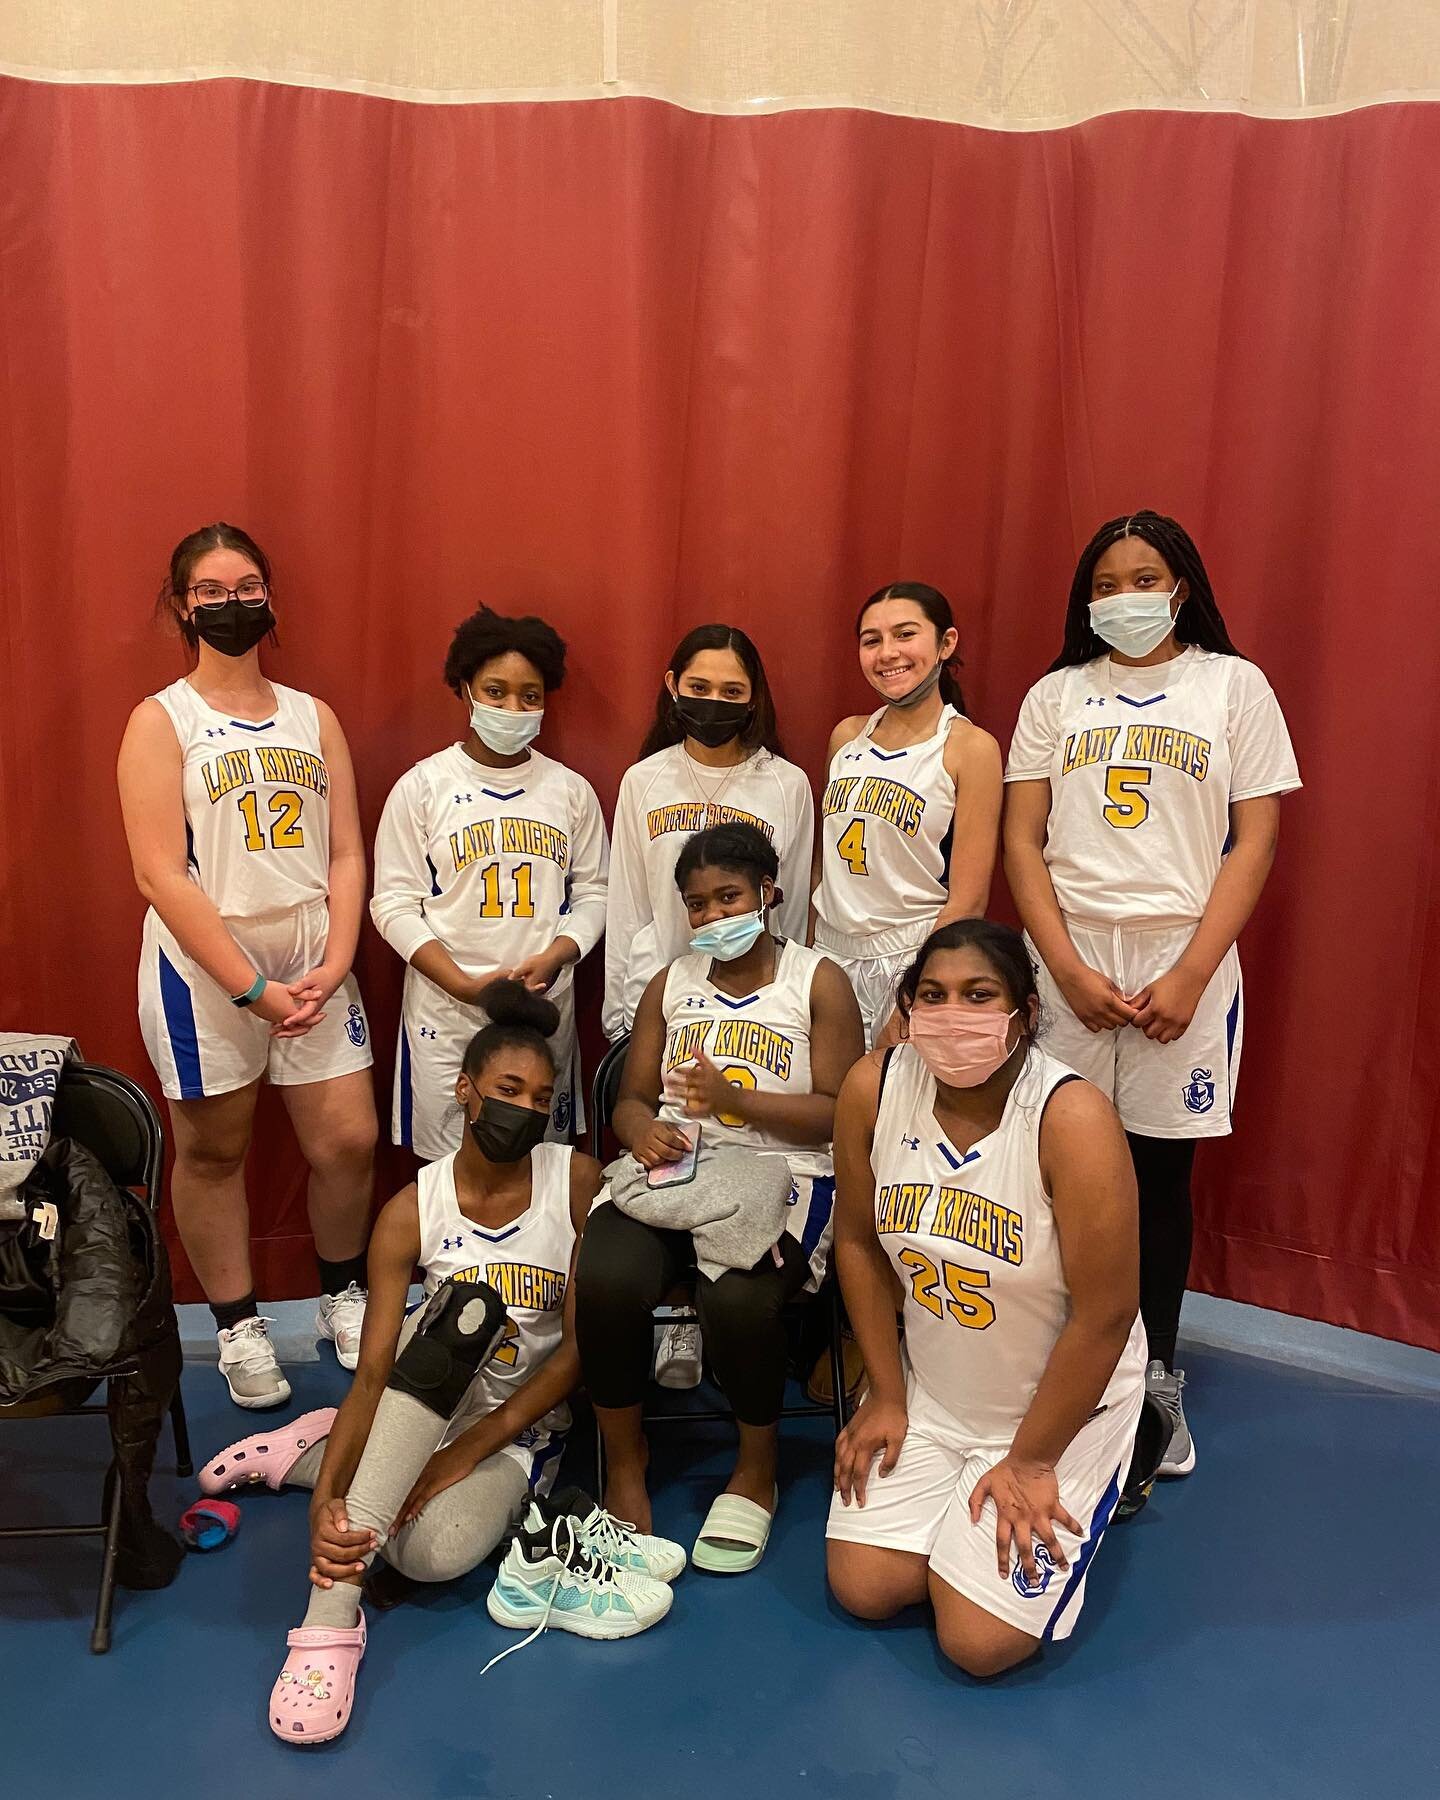 Congrats to our Girls Basketball team picking up their 2nd win this past Friday against The Harvey School!

The girls finish off the regular season this week with games at EF Academy today and NYSD tomorrow.

#GoKnights